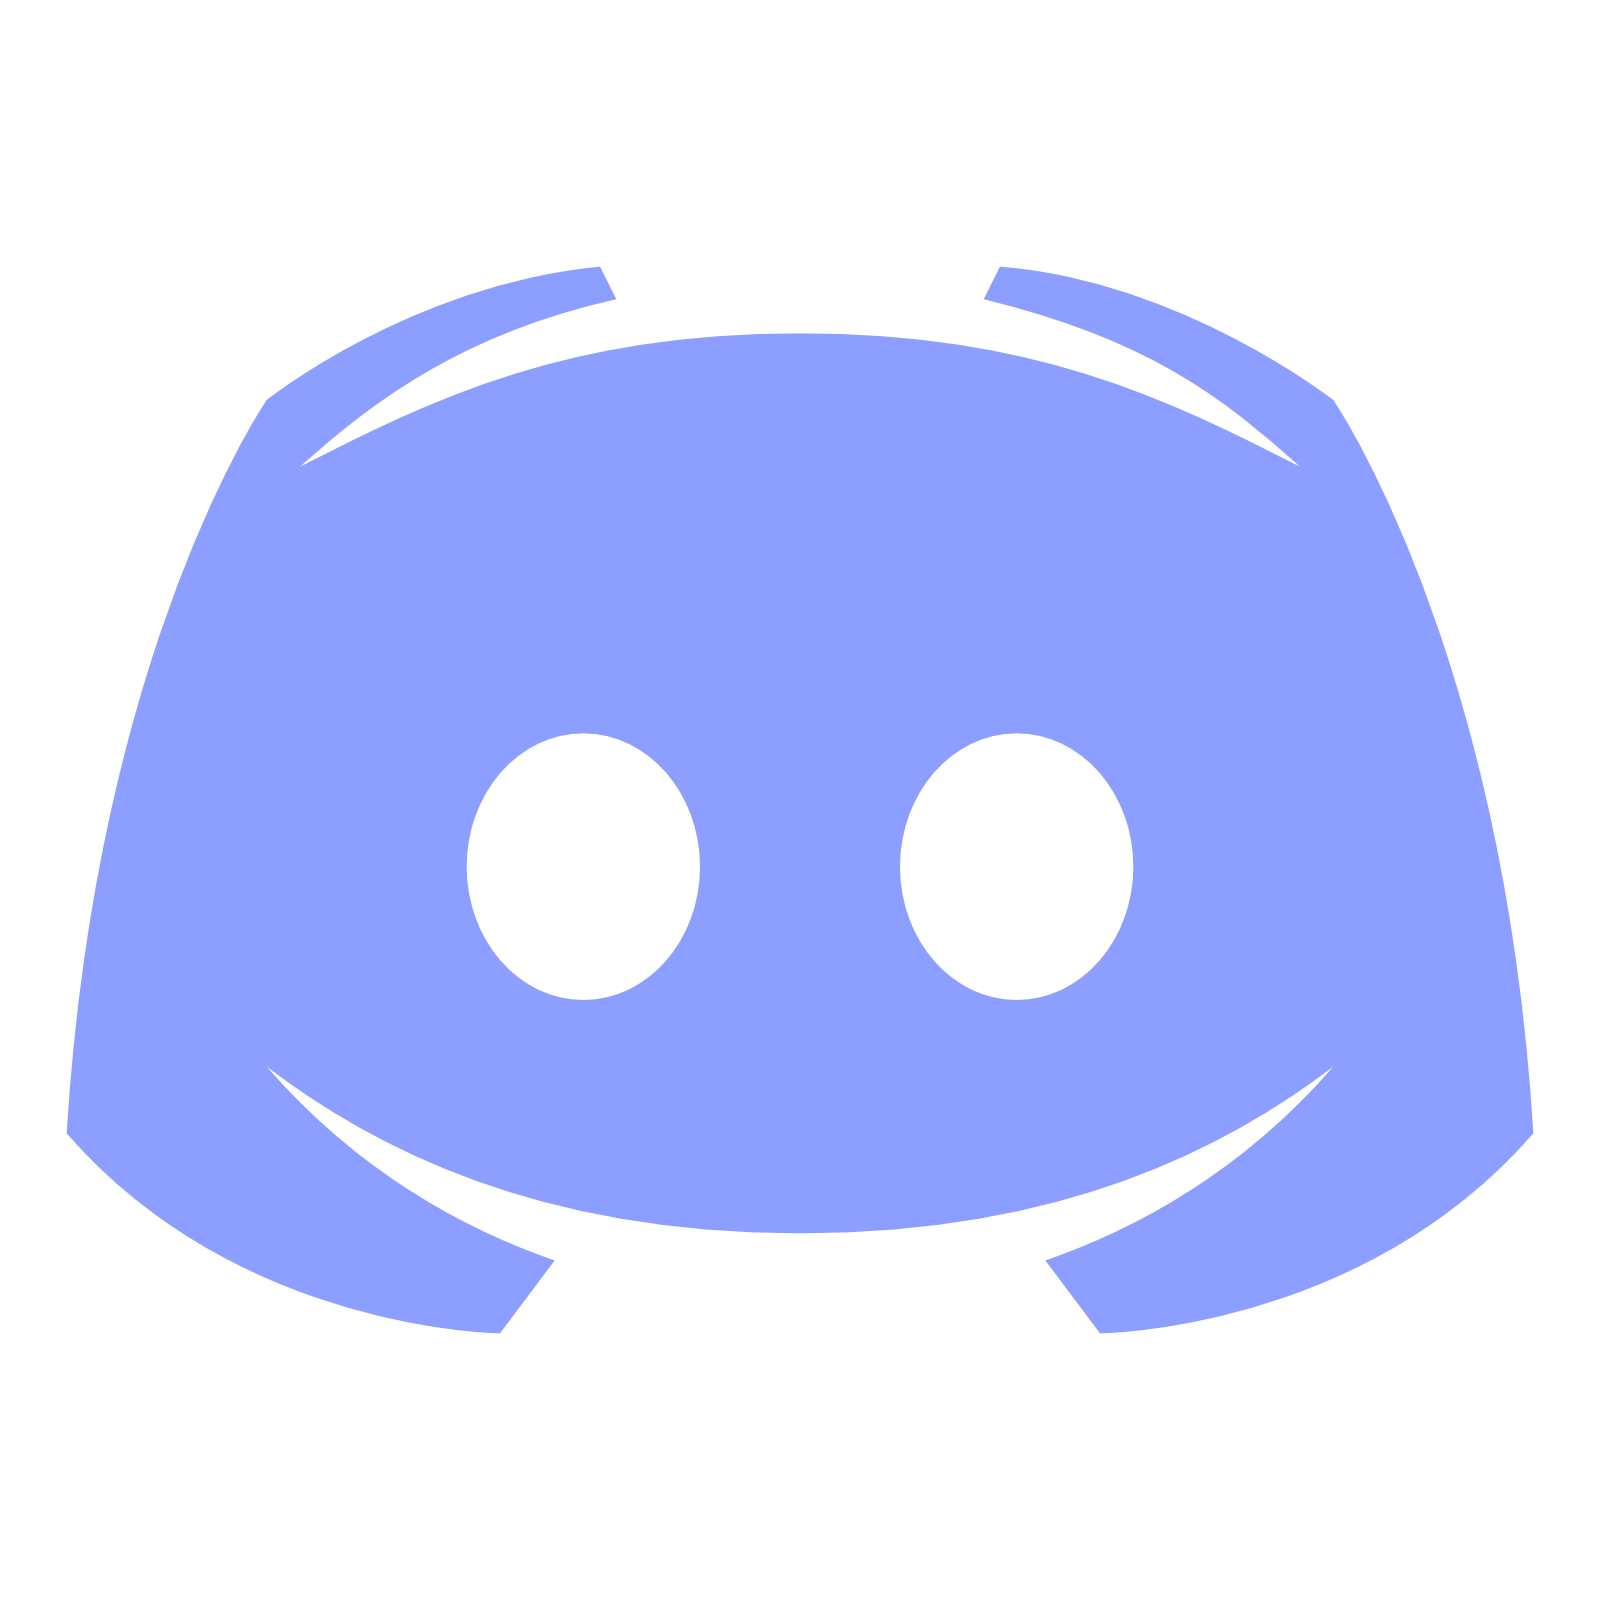 Enlarge and download Discord avatars 